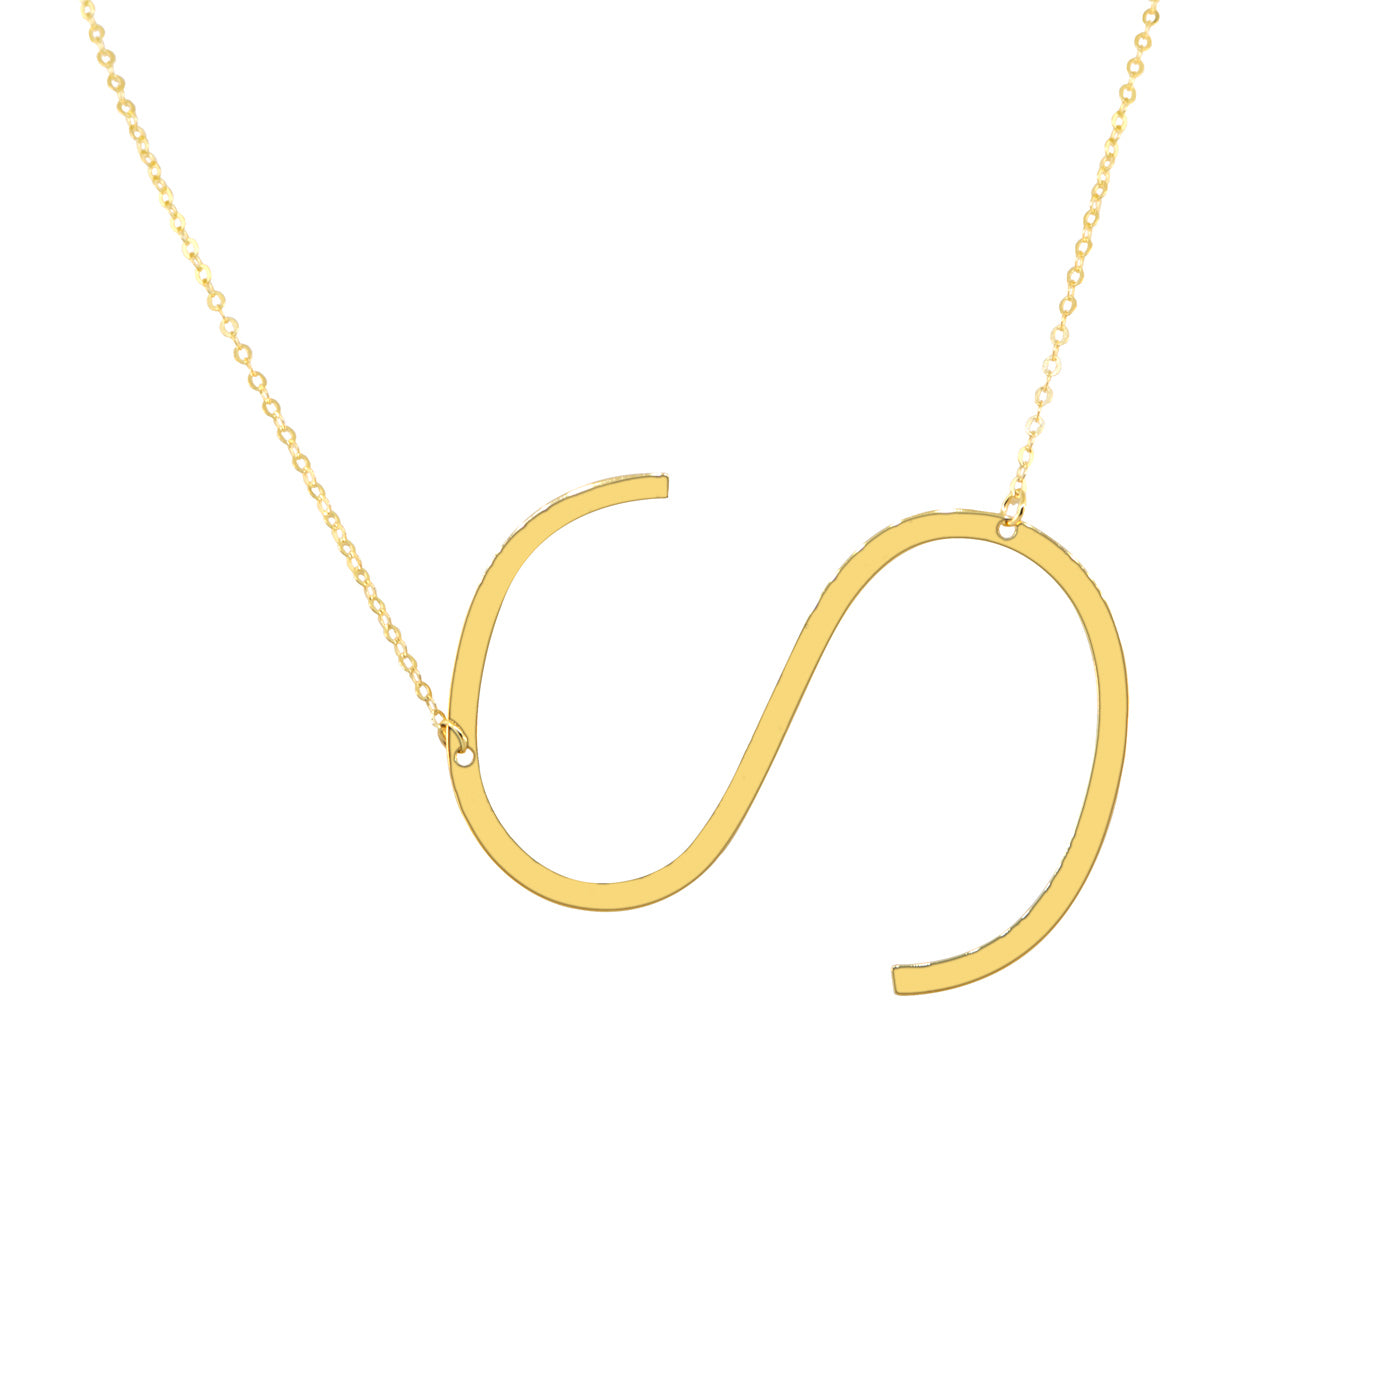 14kt Yellow Gold Sideways Initial Necklace | Ross-Simons